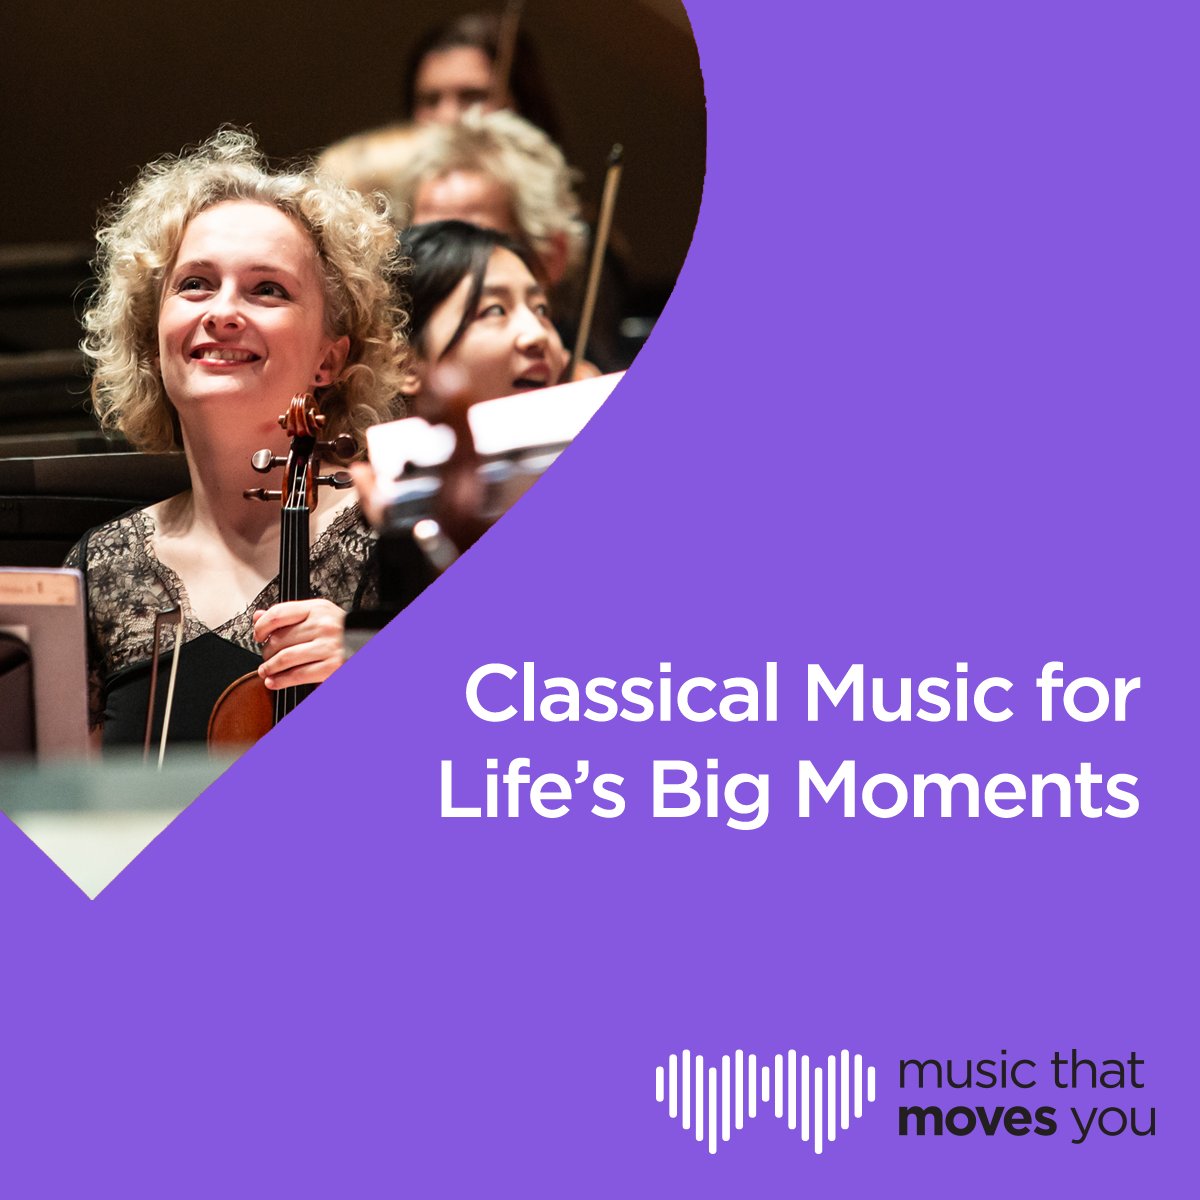 We're thrilled to be part of @aborchestras’ #MusicThatMovesYou campaign! 🎶 Classical music has the power to unite and inspire. Share the piece that moves you the most and tell us why it’s special. 

#MusicThatMovesYou